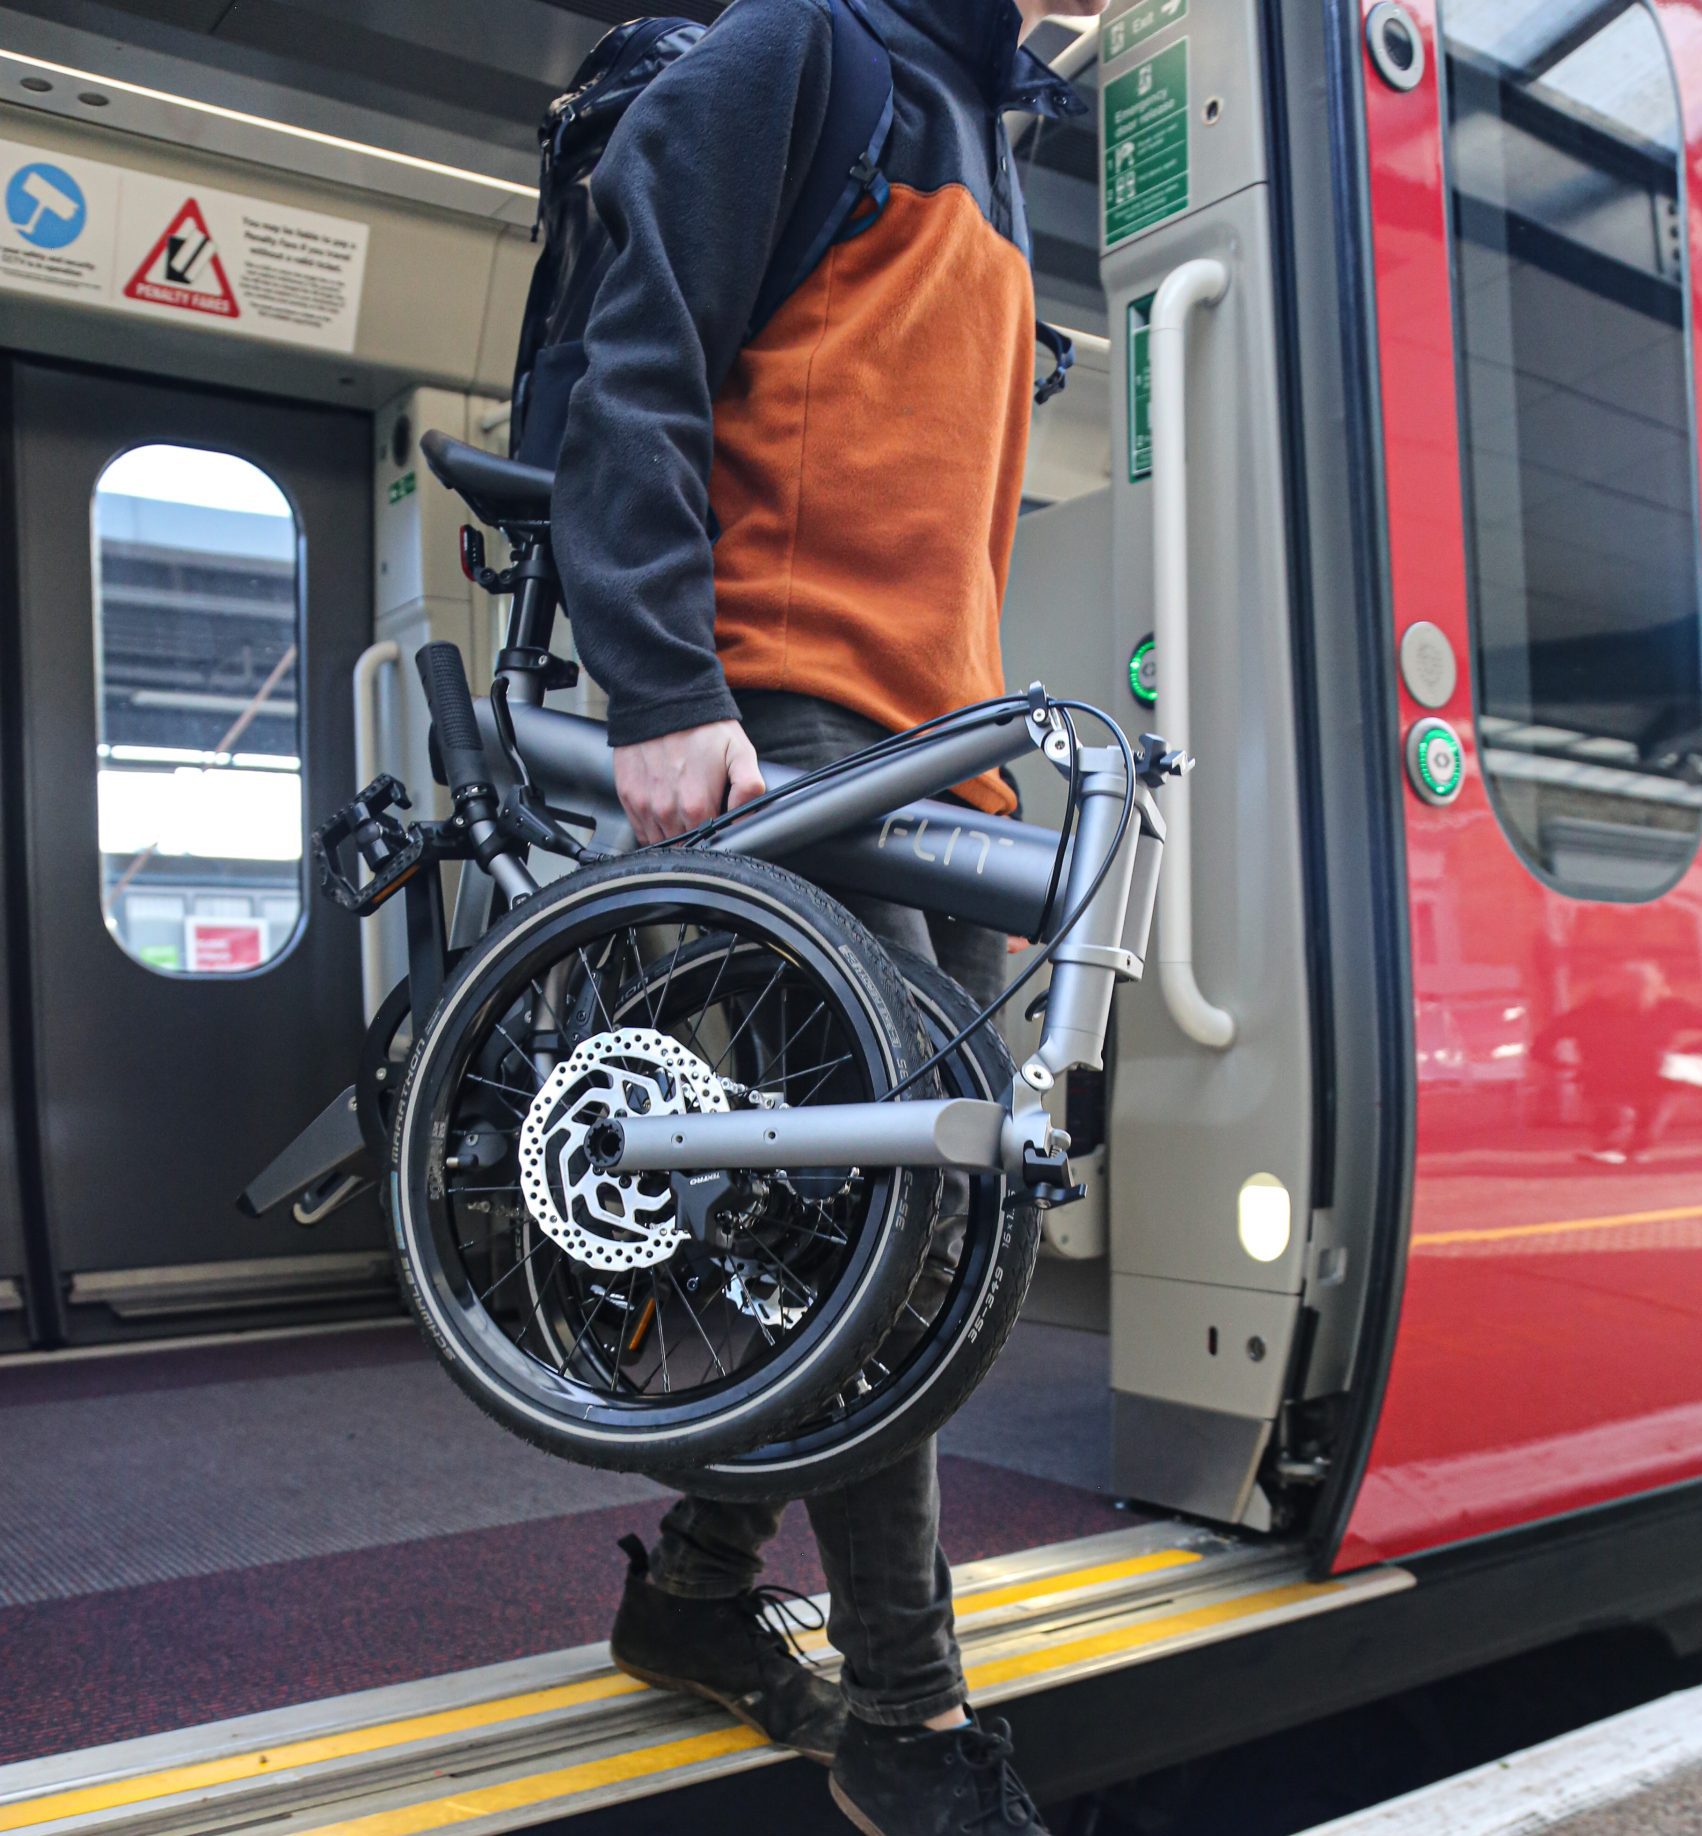 Getting off the train at Cambridge station with FLIT M2 folding ebike